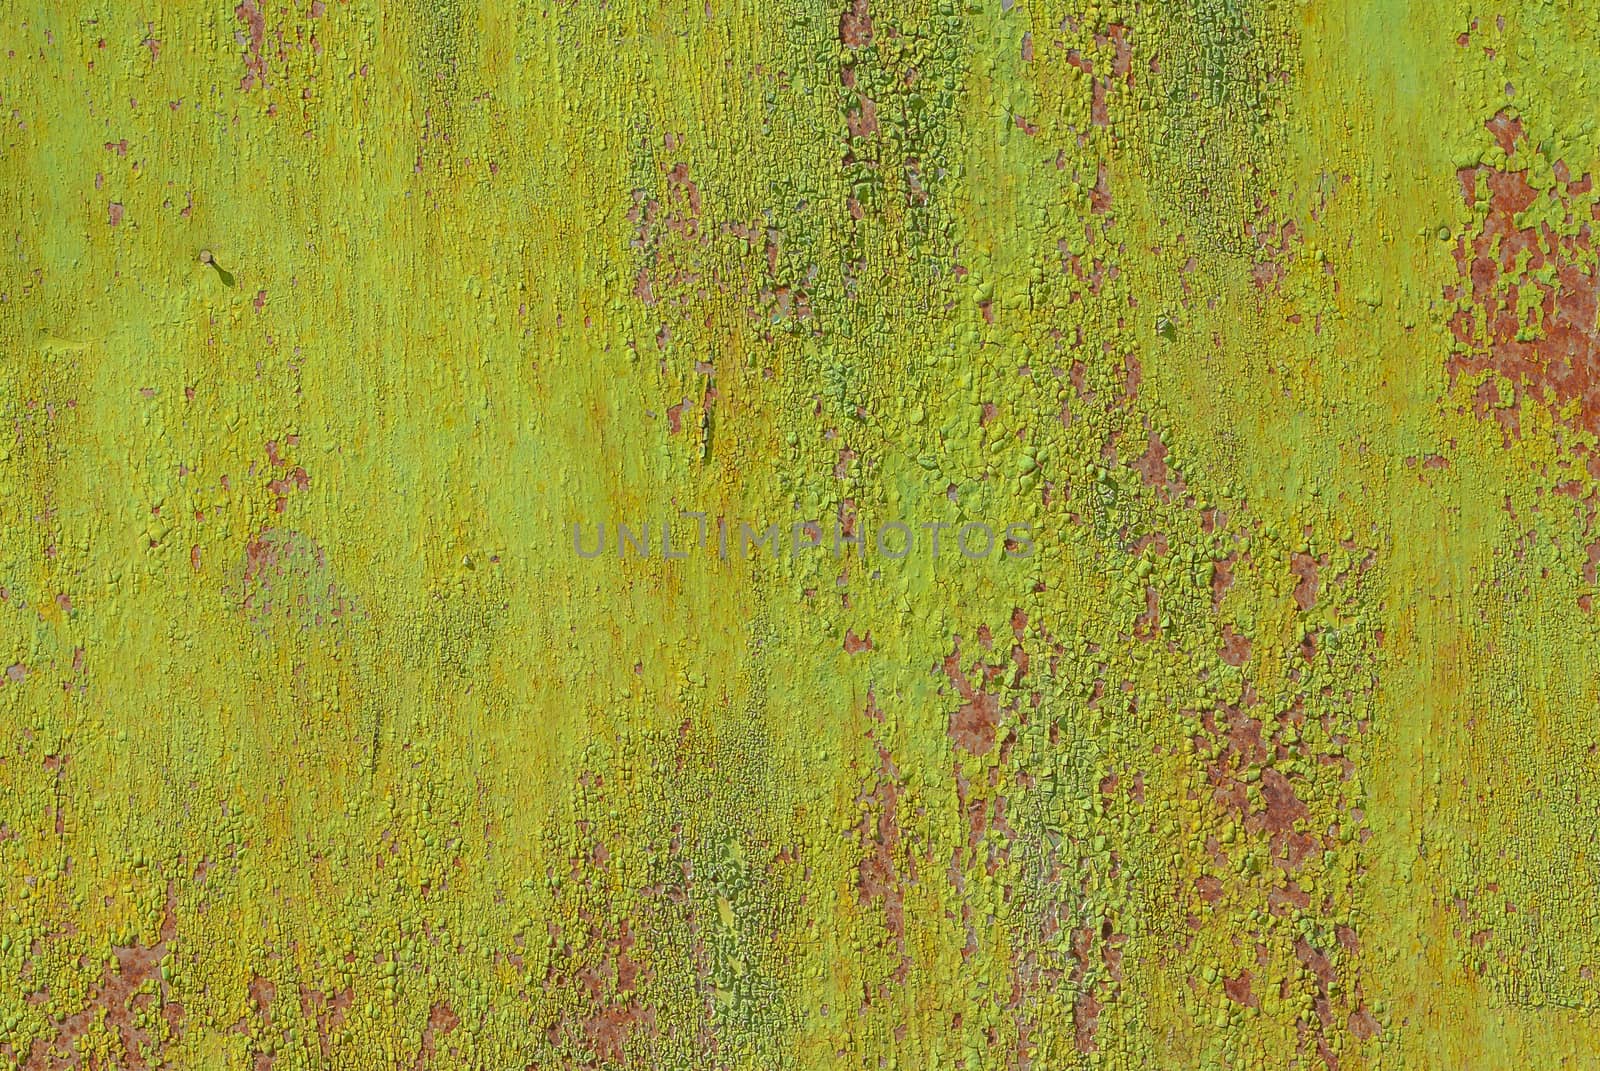 surface of rusty iron with remnants of old paint, texture background by uvisni